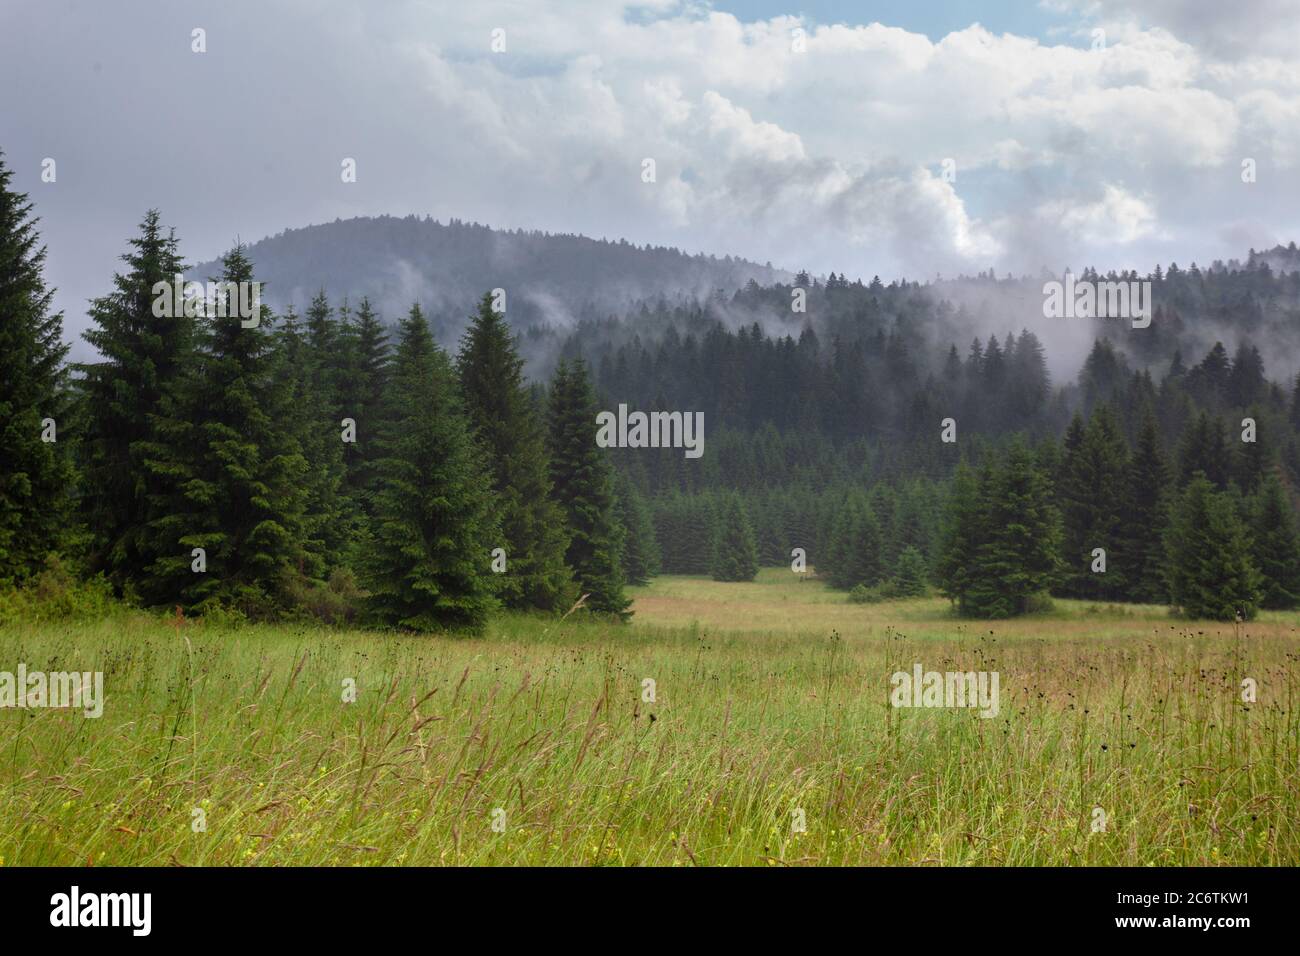 A grassland and a coniferous forest in fog, Plitvice Lakes National Park, Croatia Stock Photo